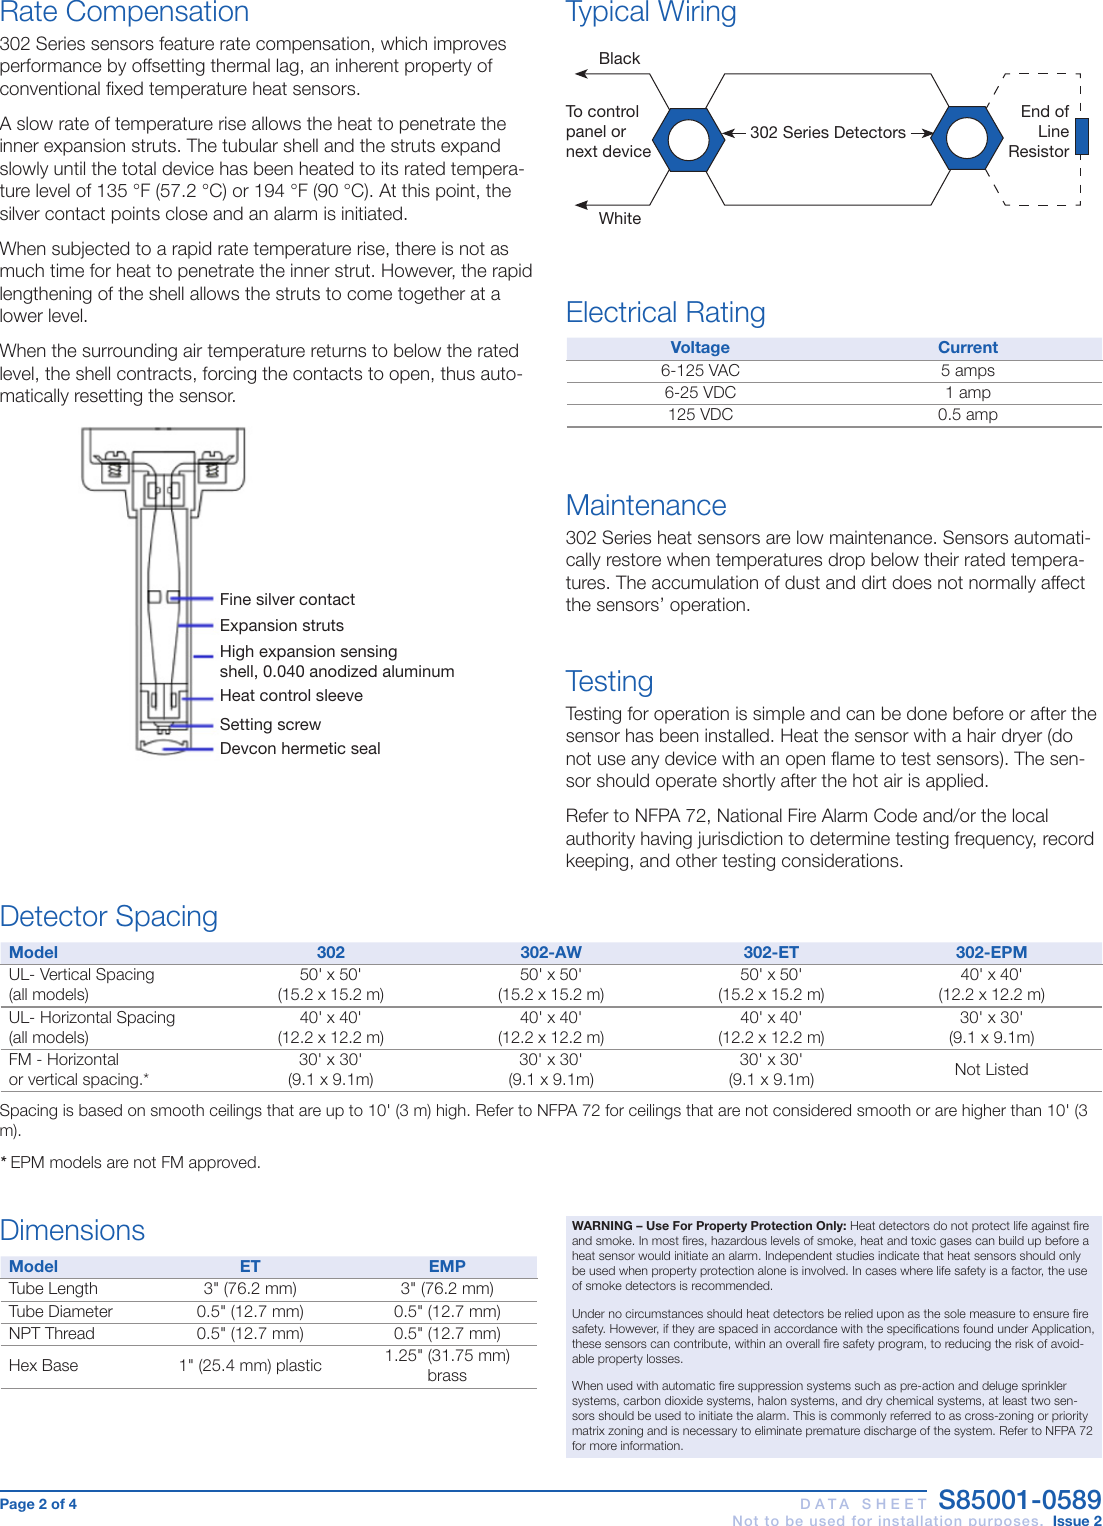 Page 2 of 4 - Data Sheet S85001-0589 -- Rate Compensation Heat Detectors  Brochure